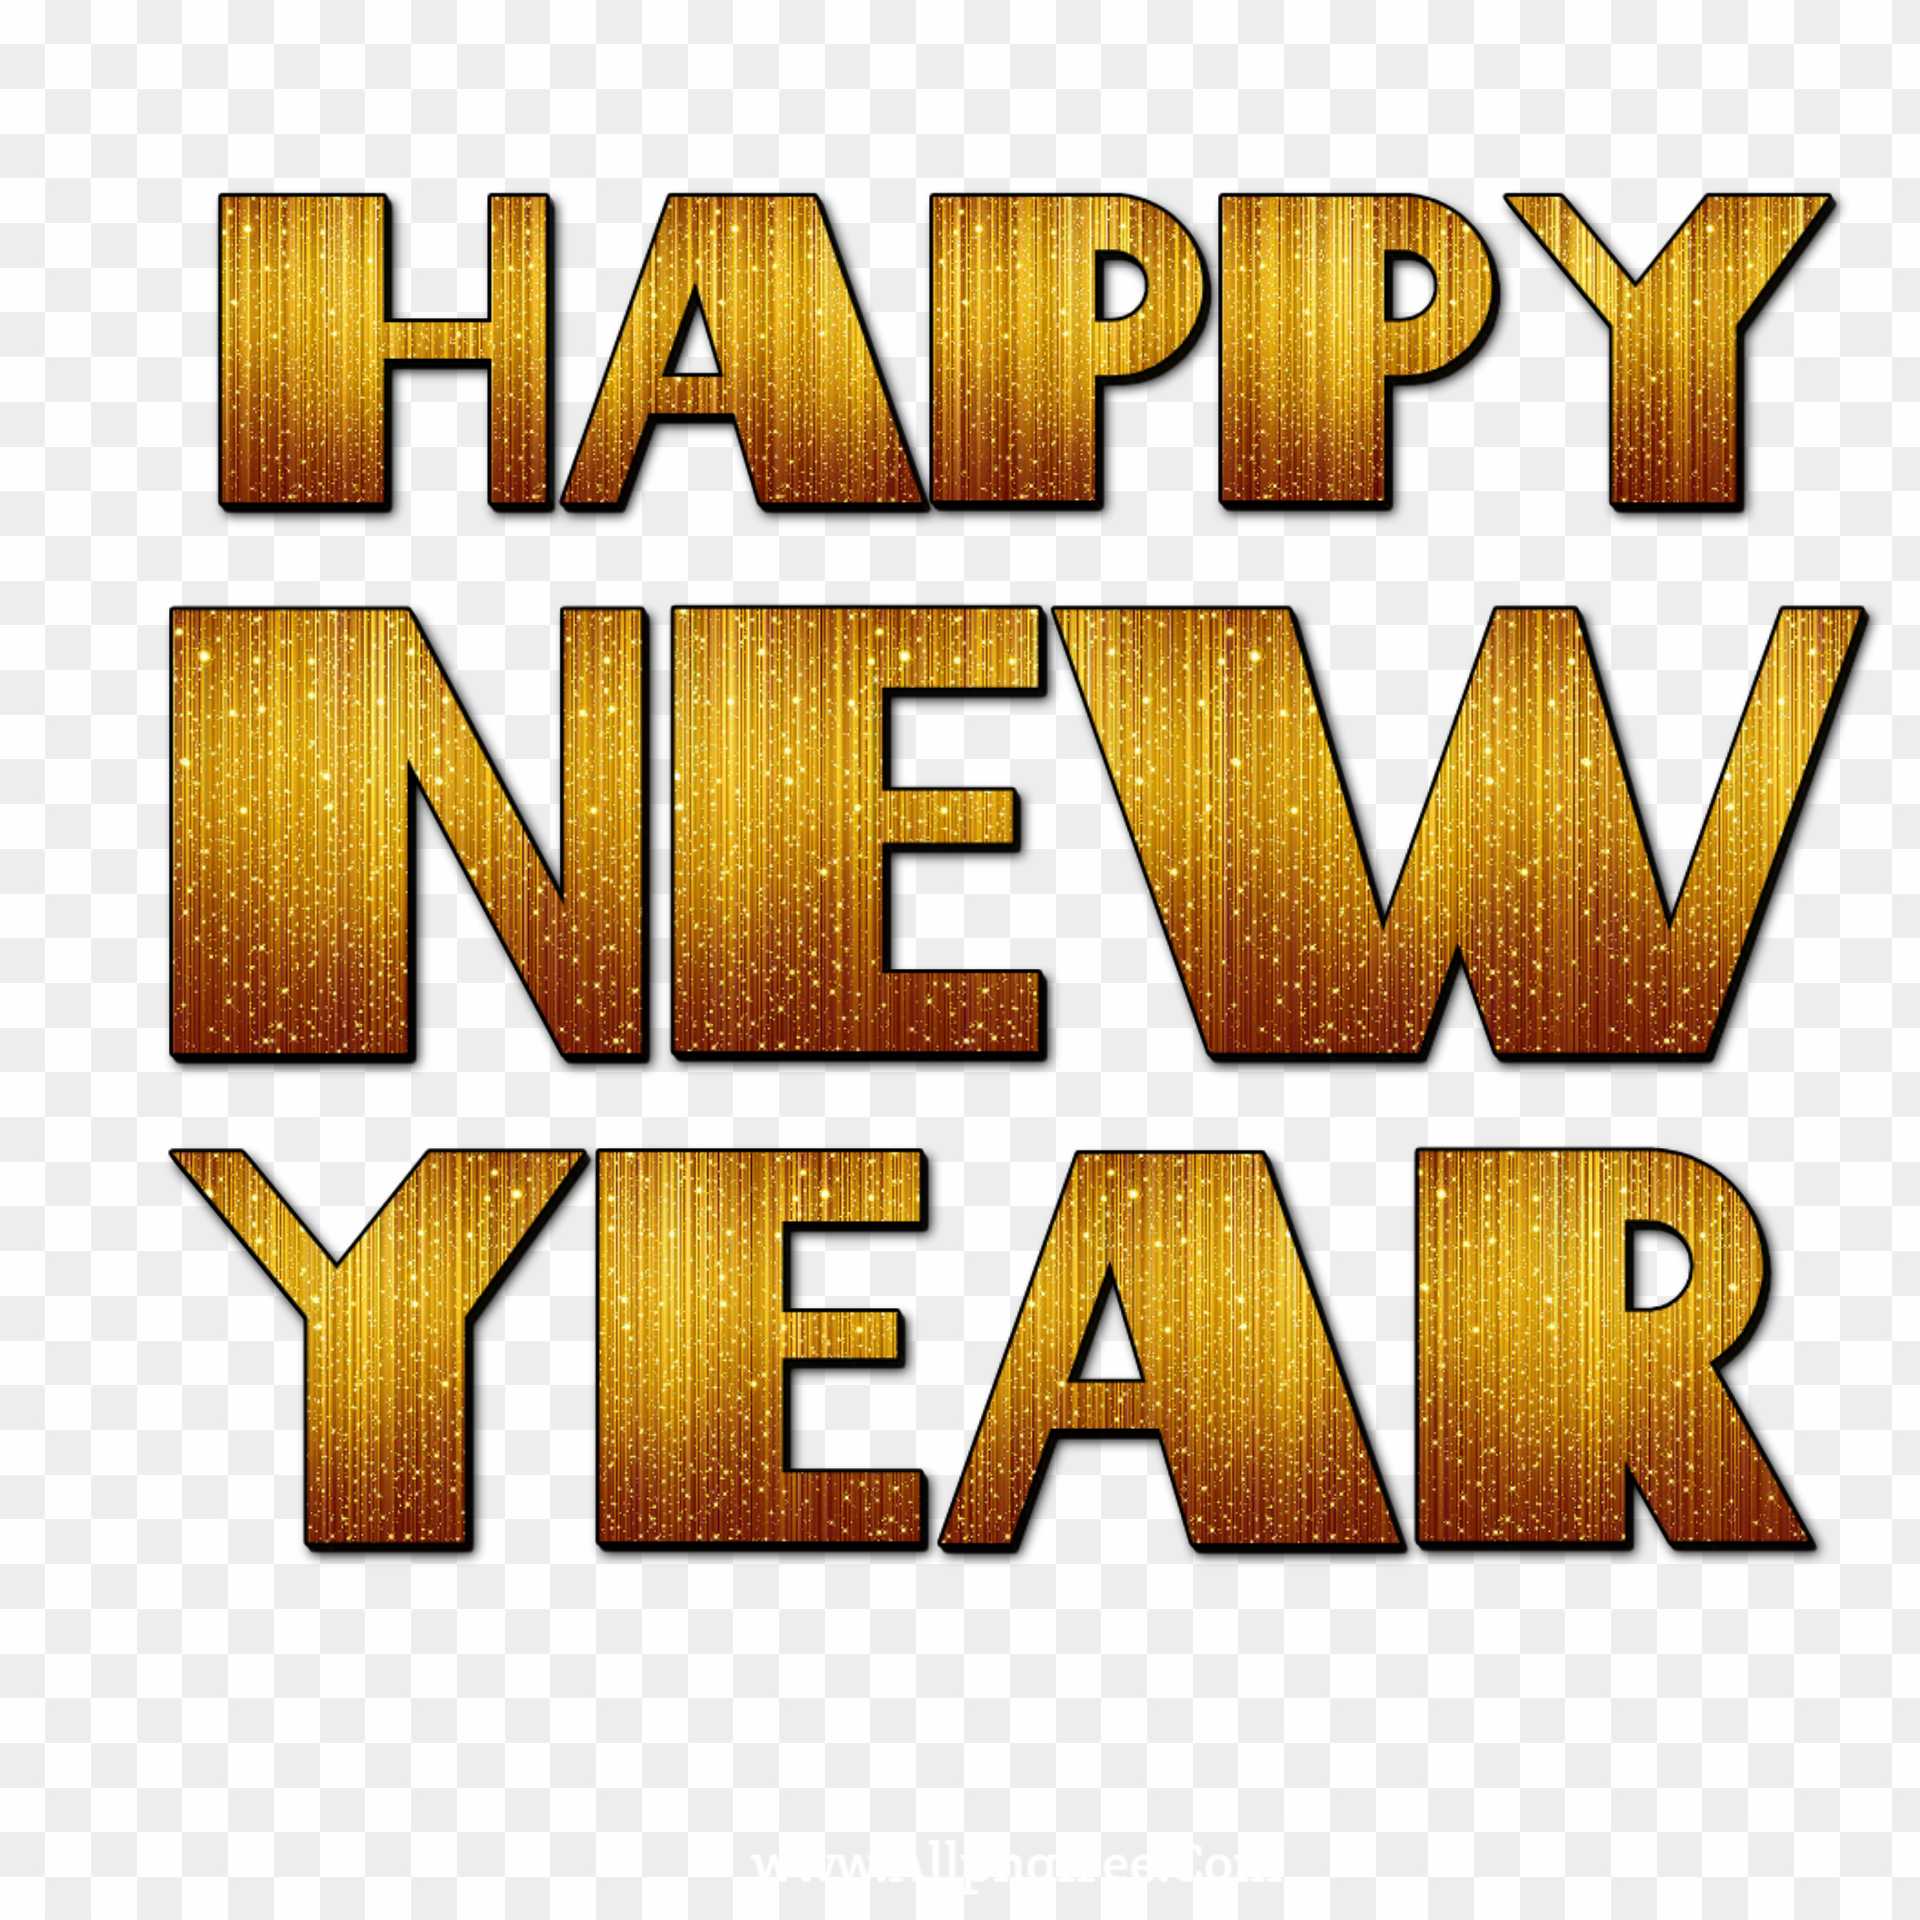 Happy New year PNG images - transparent background PNG cliparts free  download | AllPNGFree